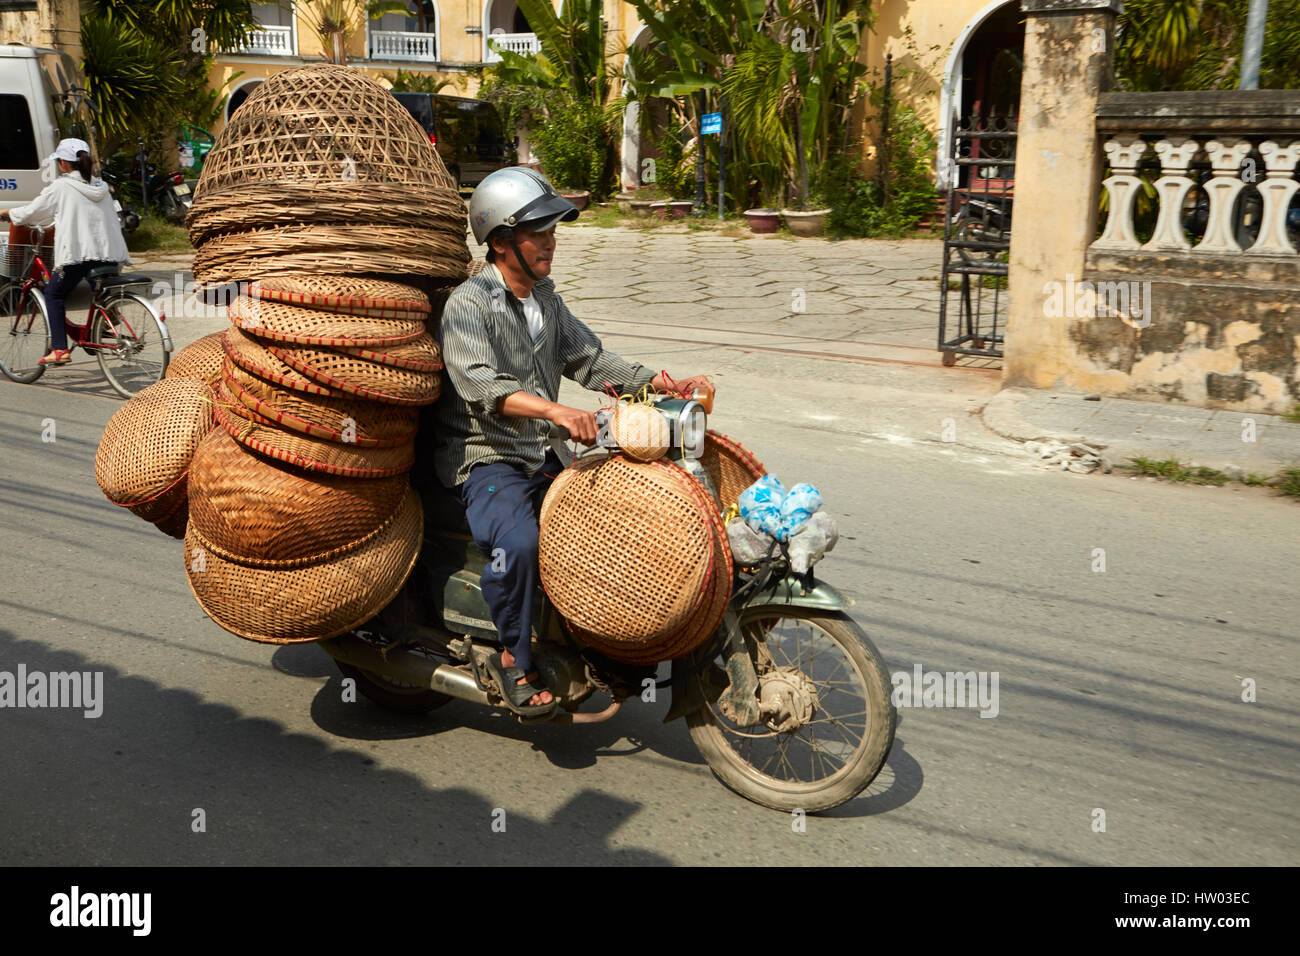 Motorcycle loaded with cane baskets, Hoi An (UNESCO World Heritage Site), Vietnam Stock Photo